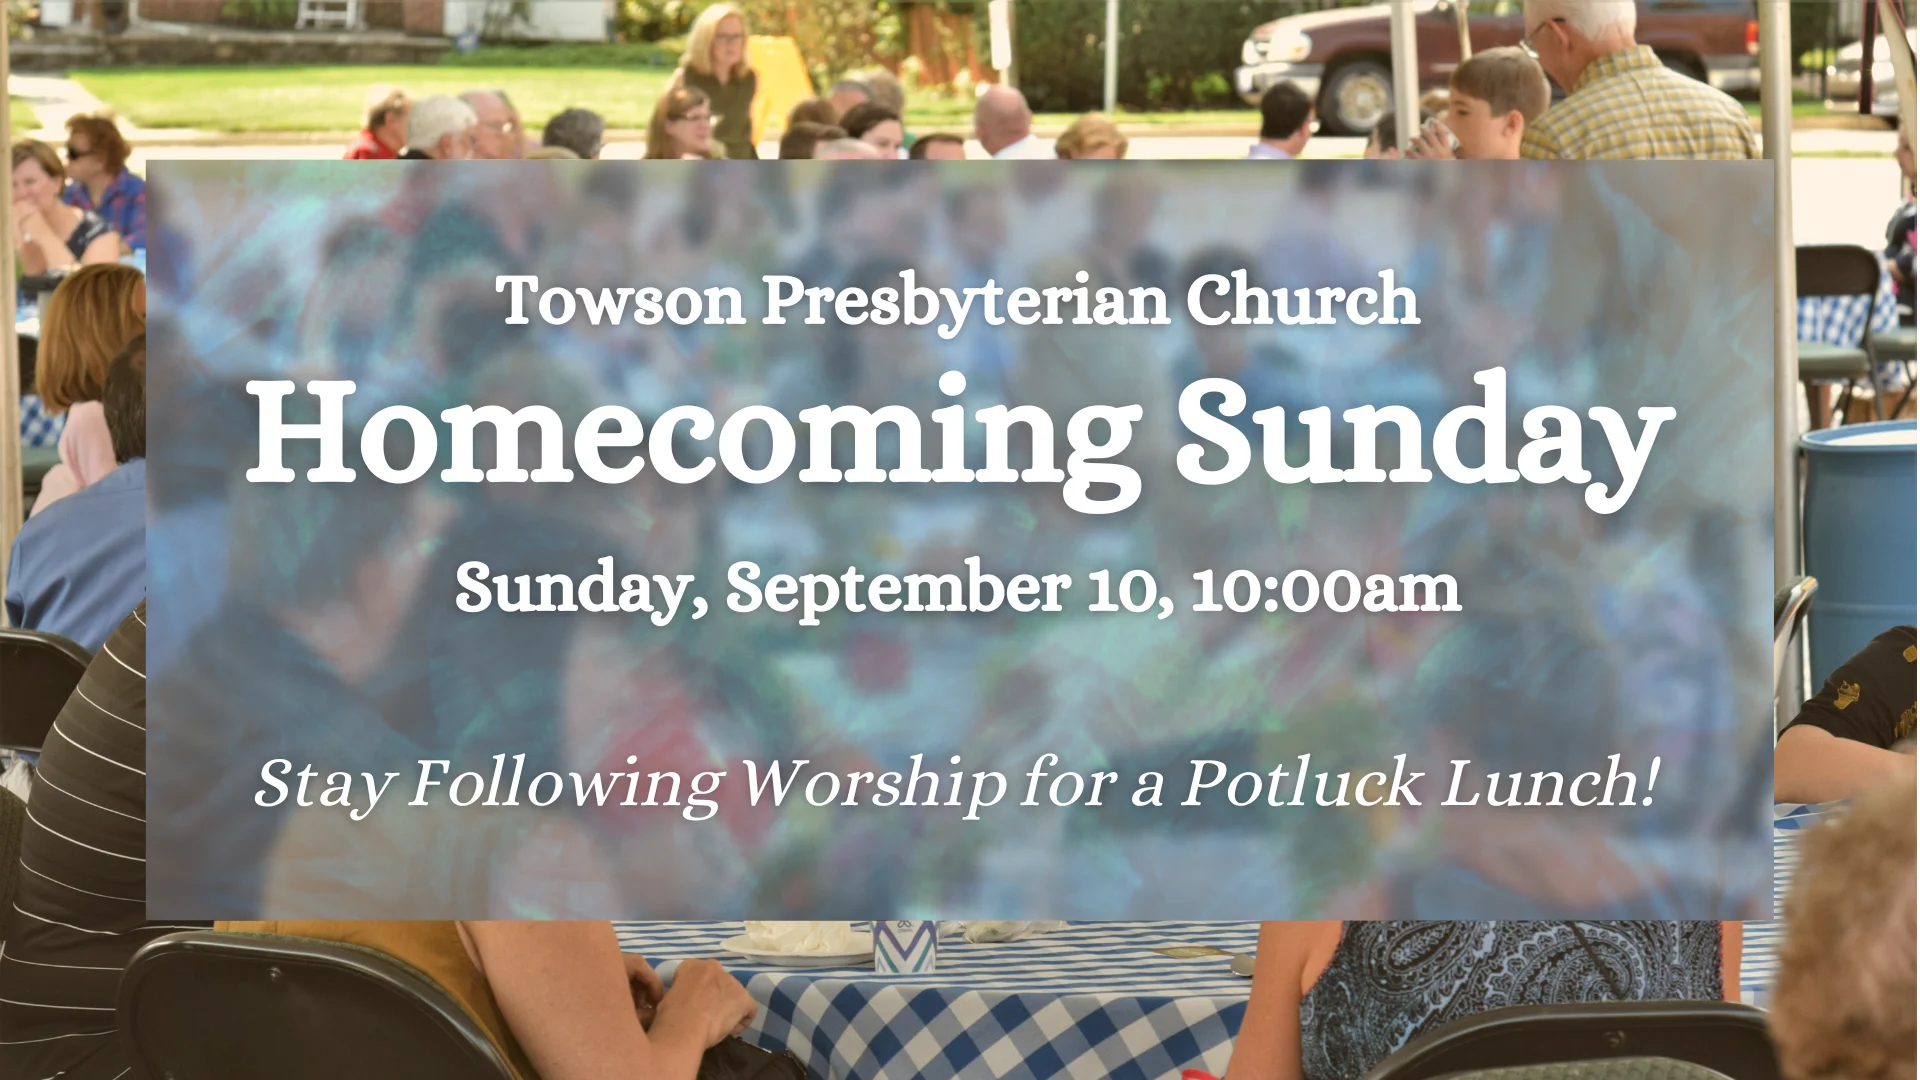 Graphic that says: "Towson Presbyterian Church. Homecoming Sunday. Sunday, September 10, 10:00am. Stay following worship for a potluck lunch."